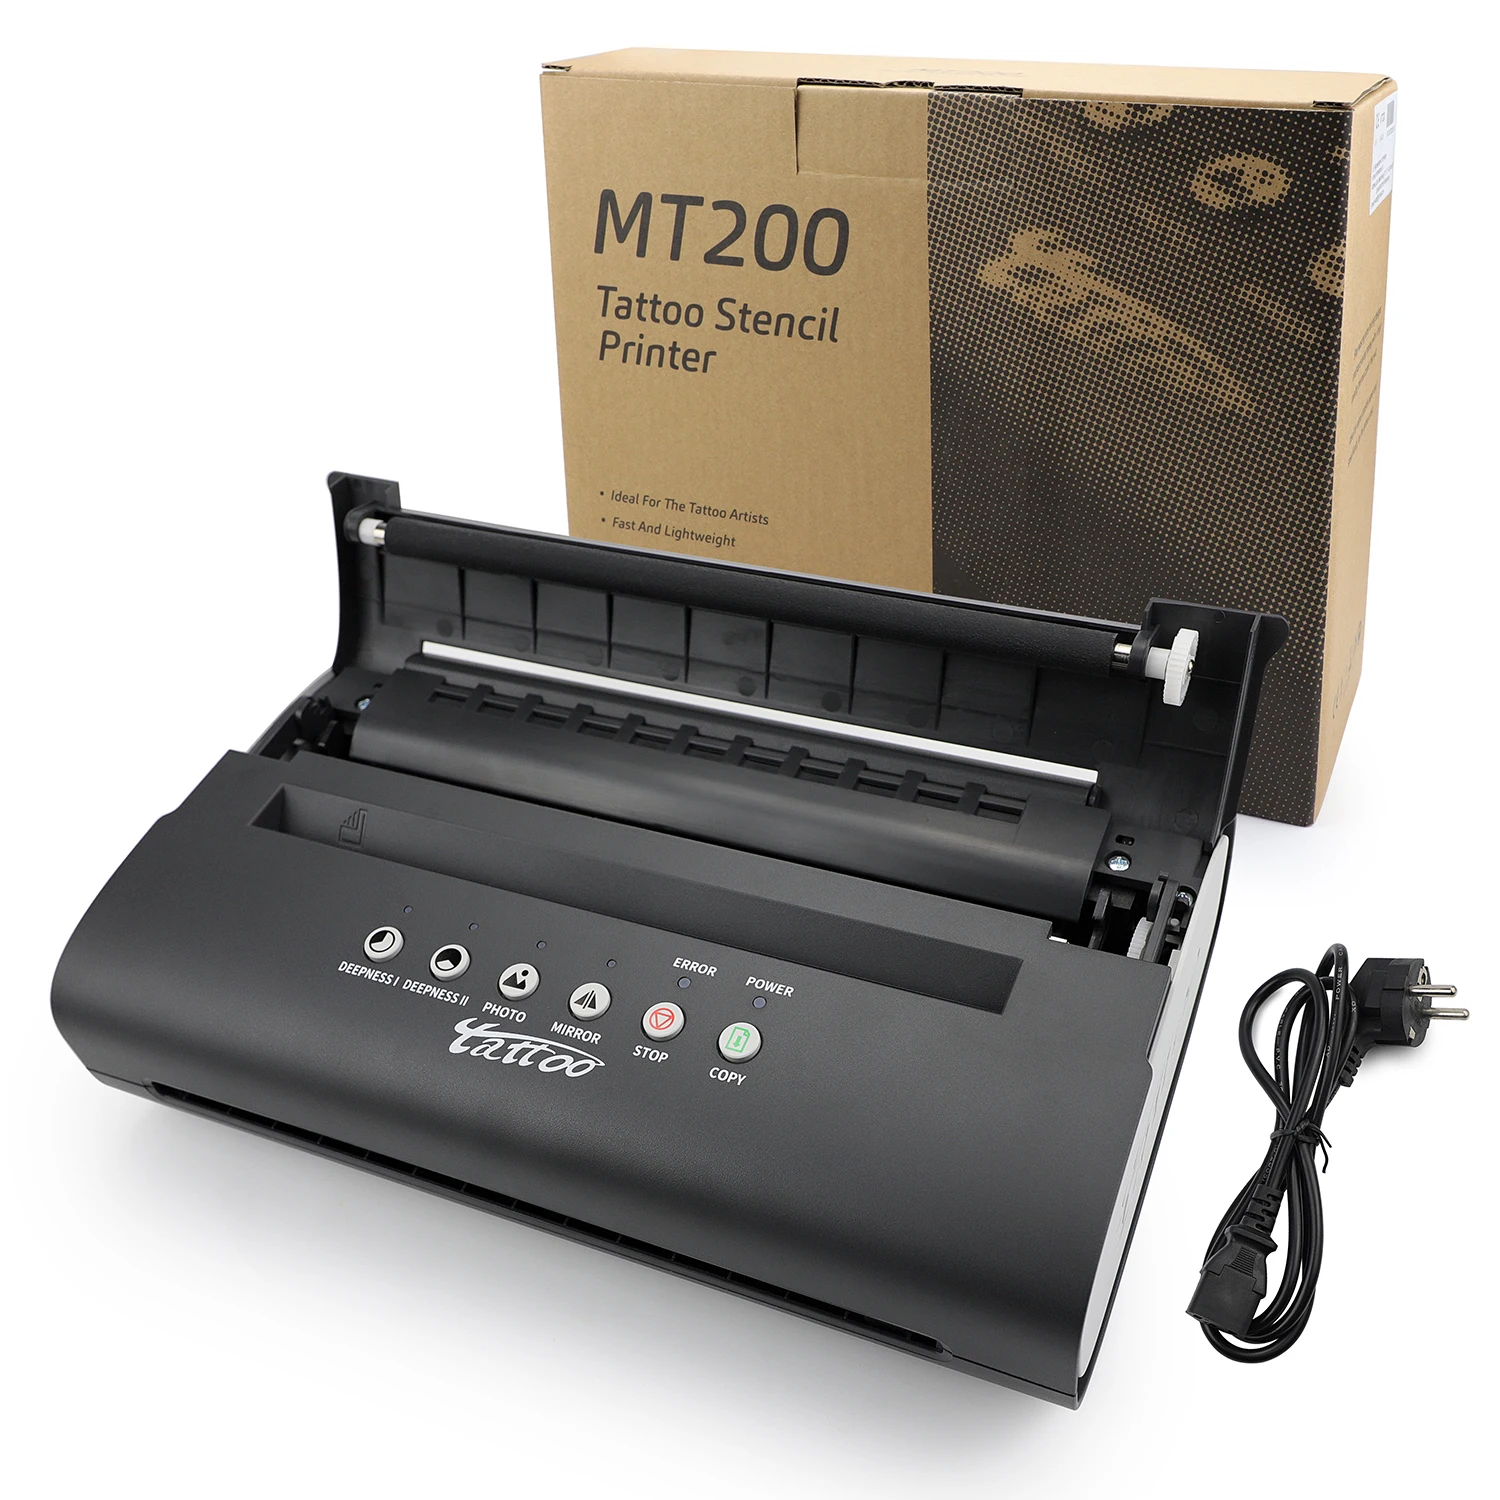 Mt 200 Tattoo Stencil Printer Machine Transfer Thermal Copier For Tattoo  Photo Copy Drawing Printing - Buy Stencil Printer,Transfer Thermal  Copier,Mt 200 Product on 